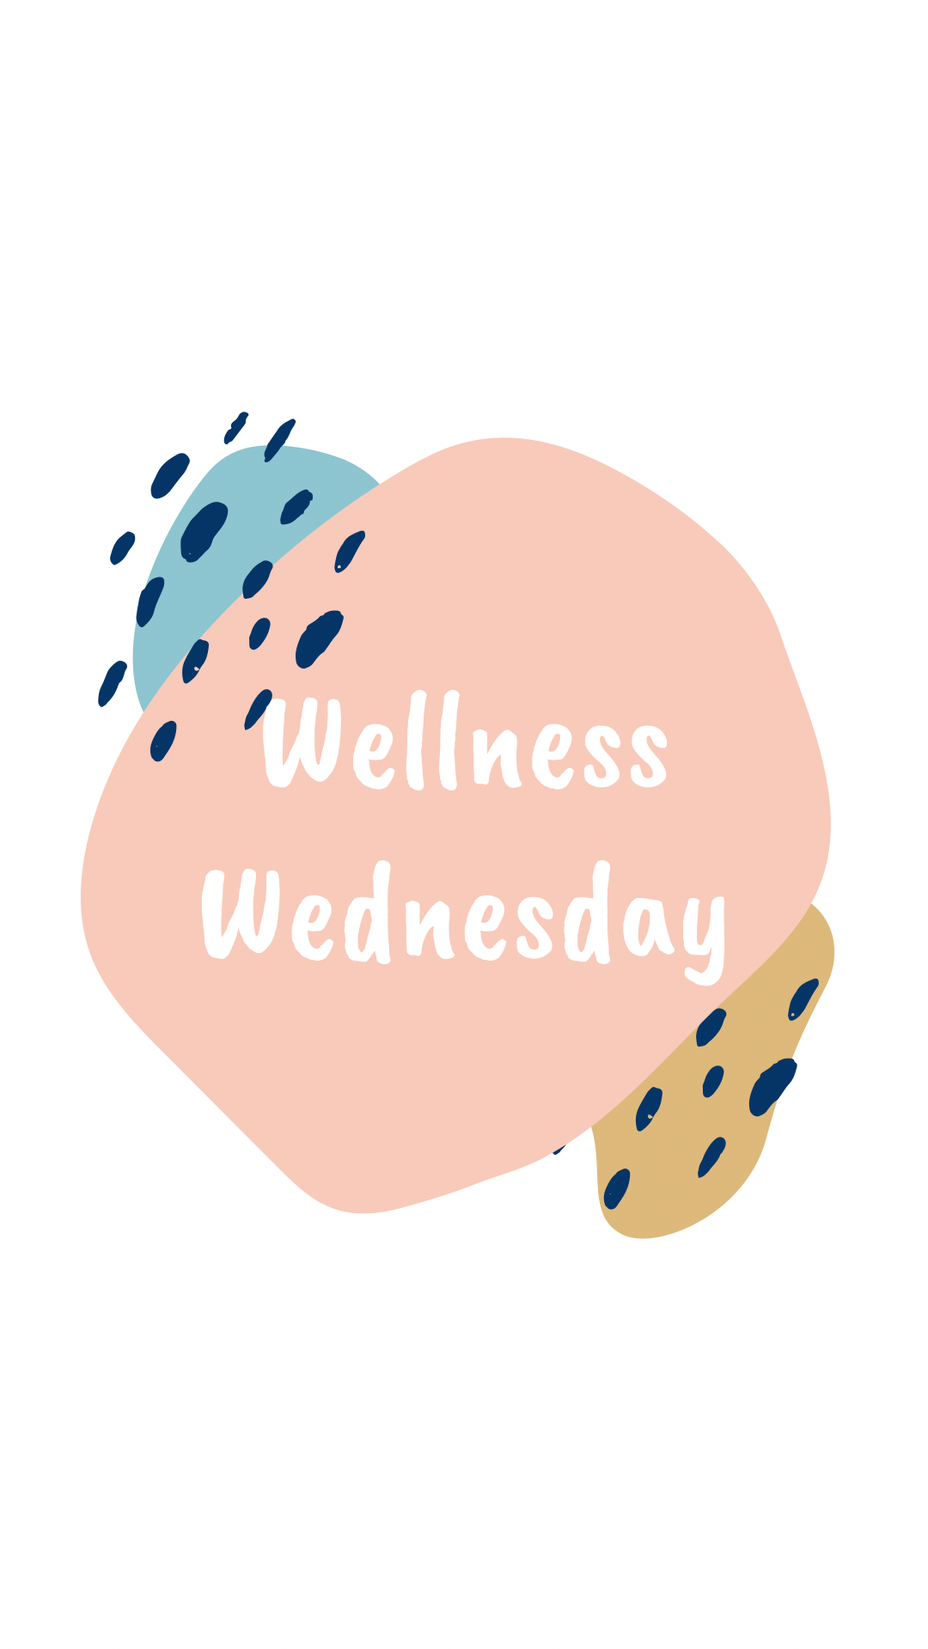 <p>Wellness Wednesday: <a href="https://themighty.com/topic/diabetes/?label=Diabetes" class="tm-embed-link  tm-autolink health-map" data-id="5b23ce7700553f33fe99129c" data-name="Diabetes" title="Diabetes" target="_blank">Diabetes</a> and Heart Health</p>